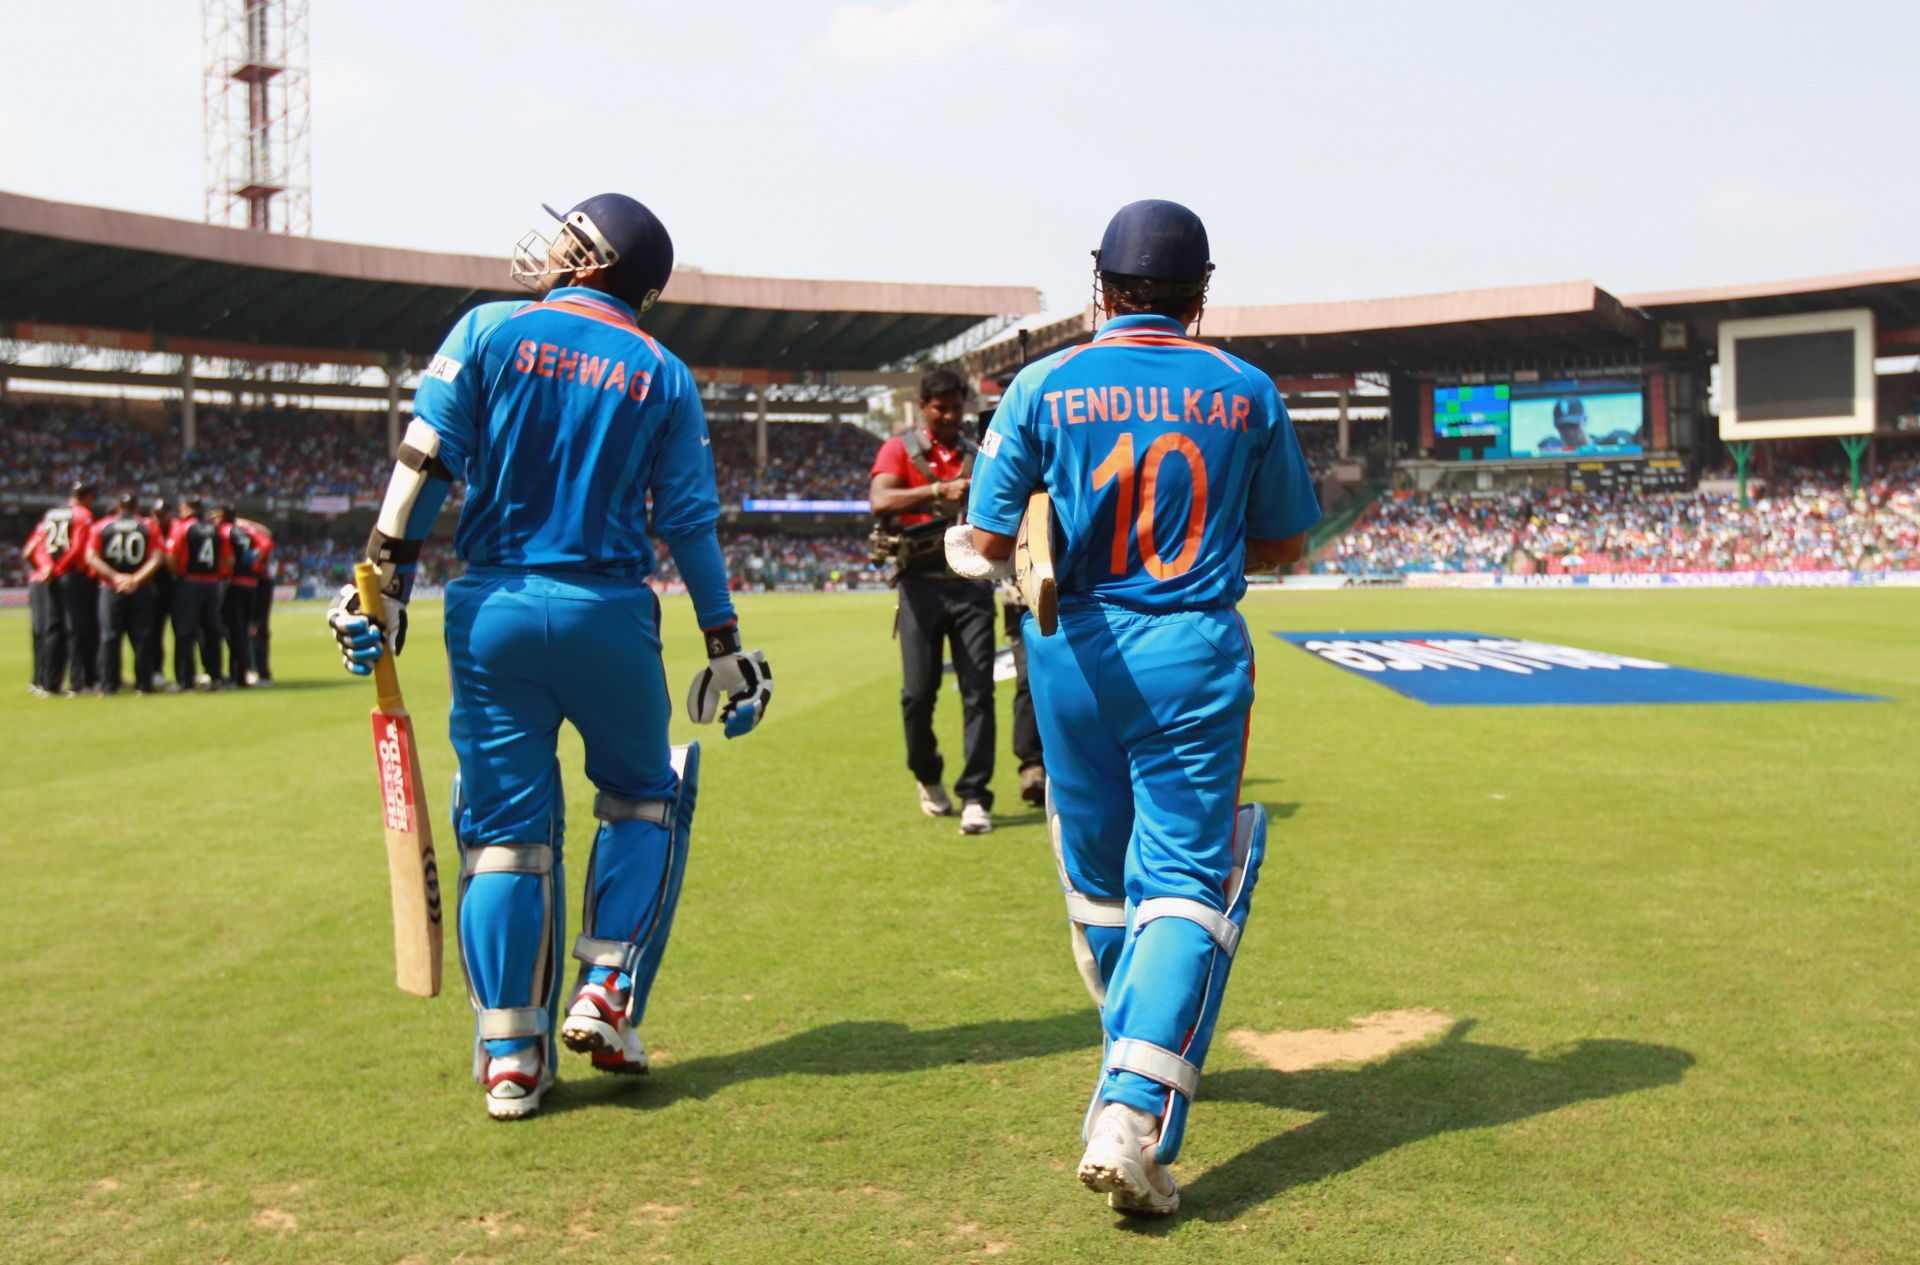 Virender Sehwag (L) and Sachin Tendulkar (R) - The regular openers. (Picture from 2011 ICC World Cup)